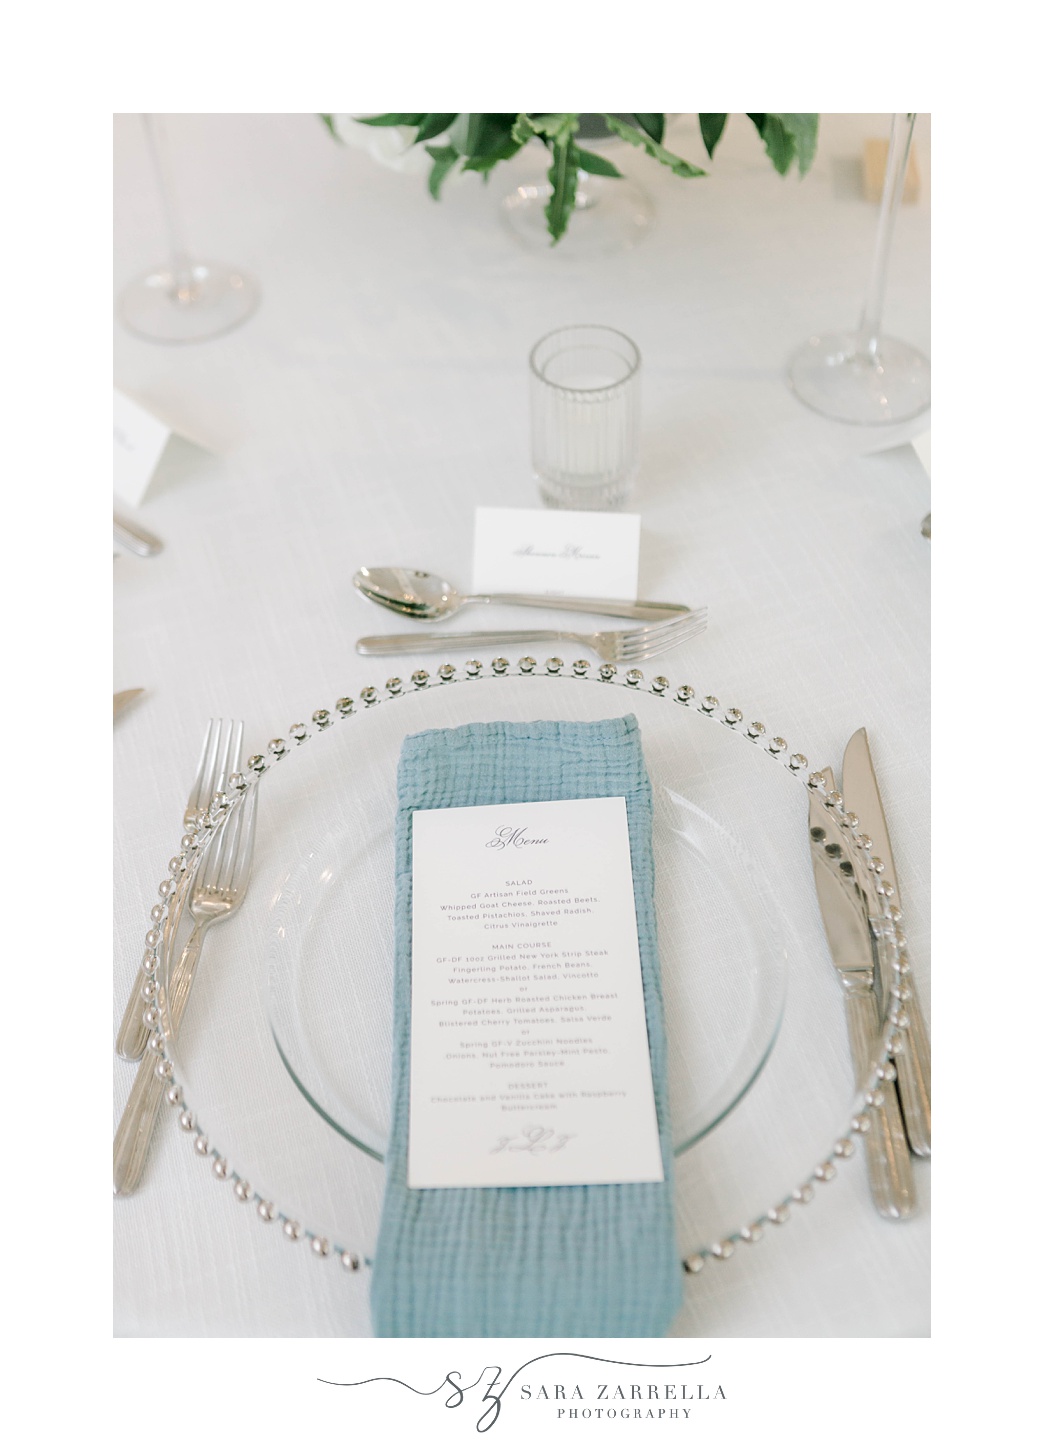 place setting with silverware and blue napkin